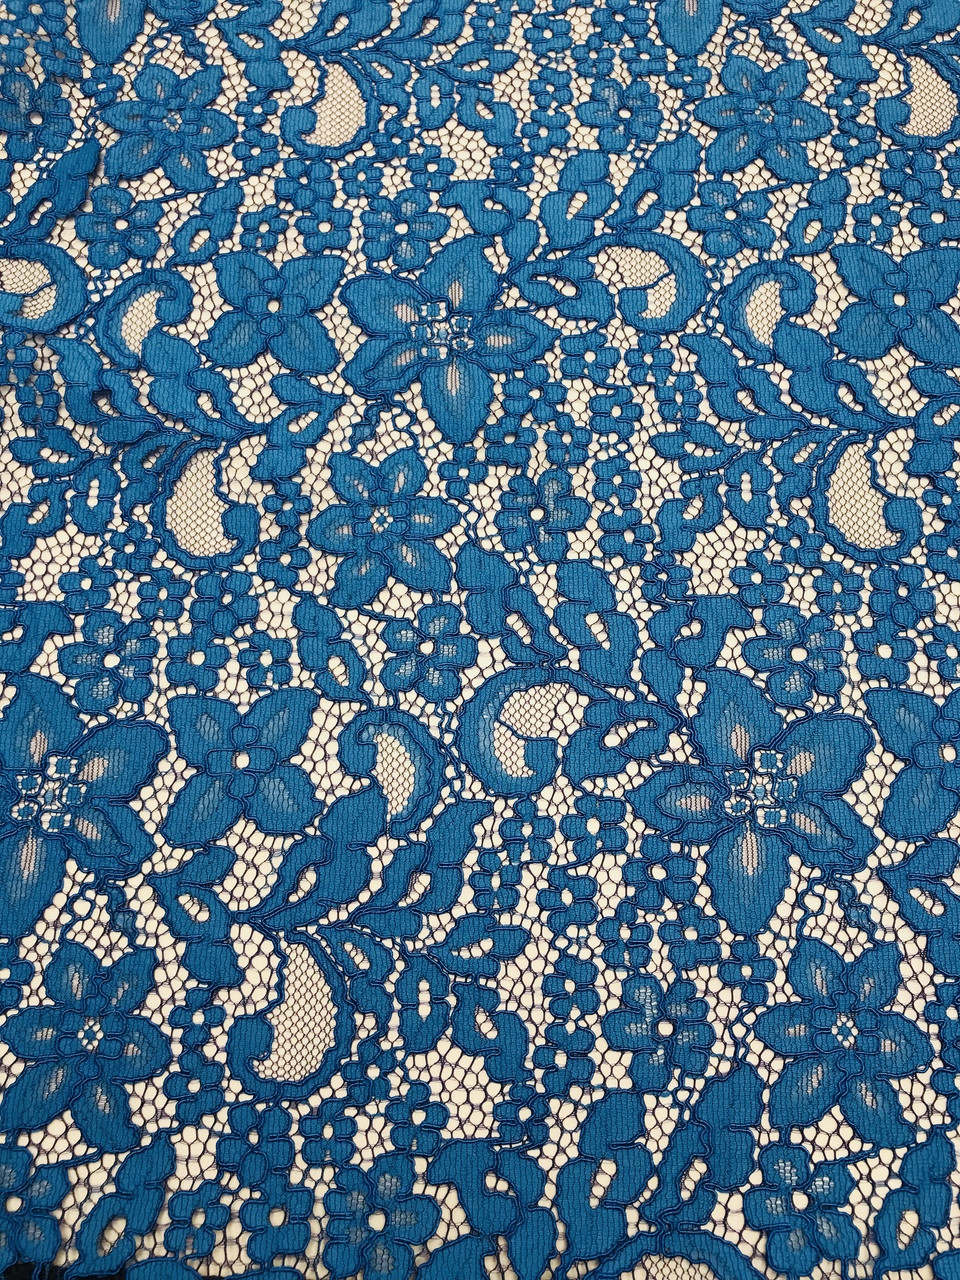 re embroidered lace fabric